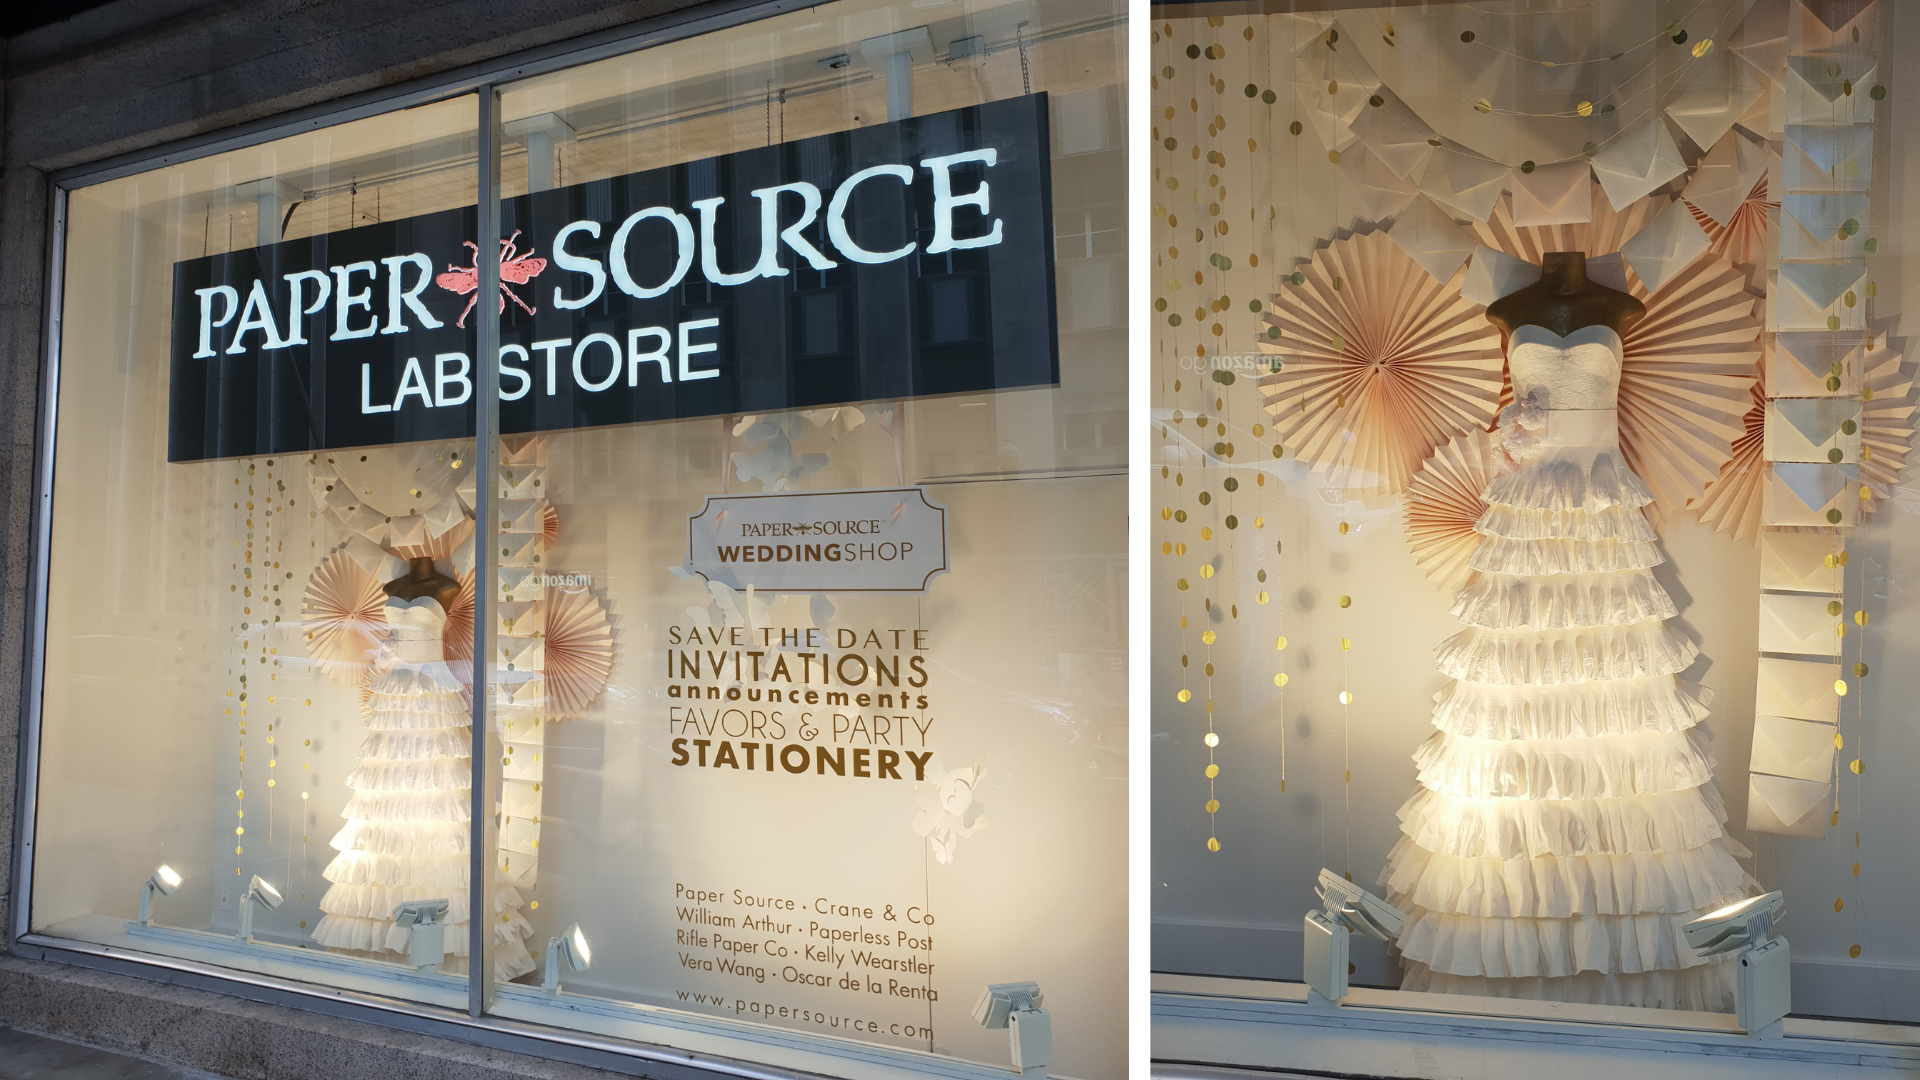 Papersource Chicago